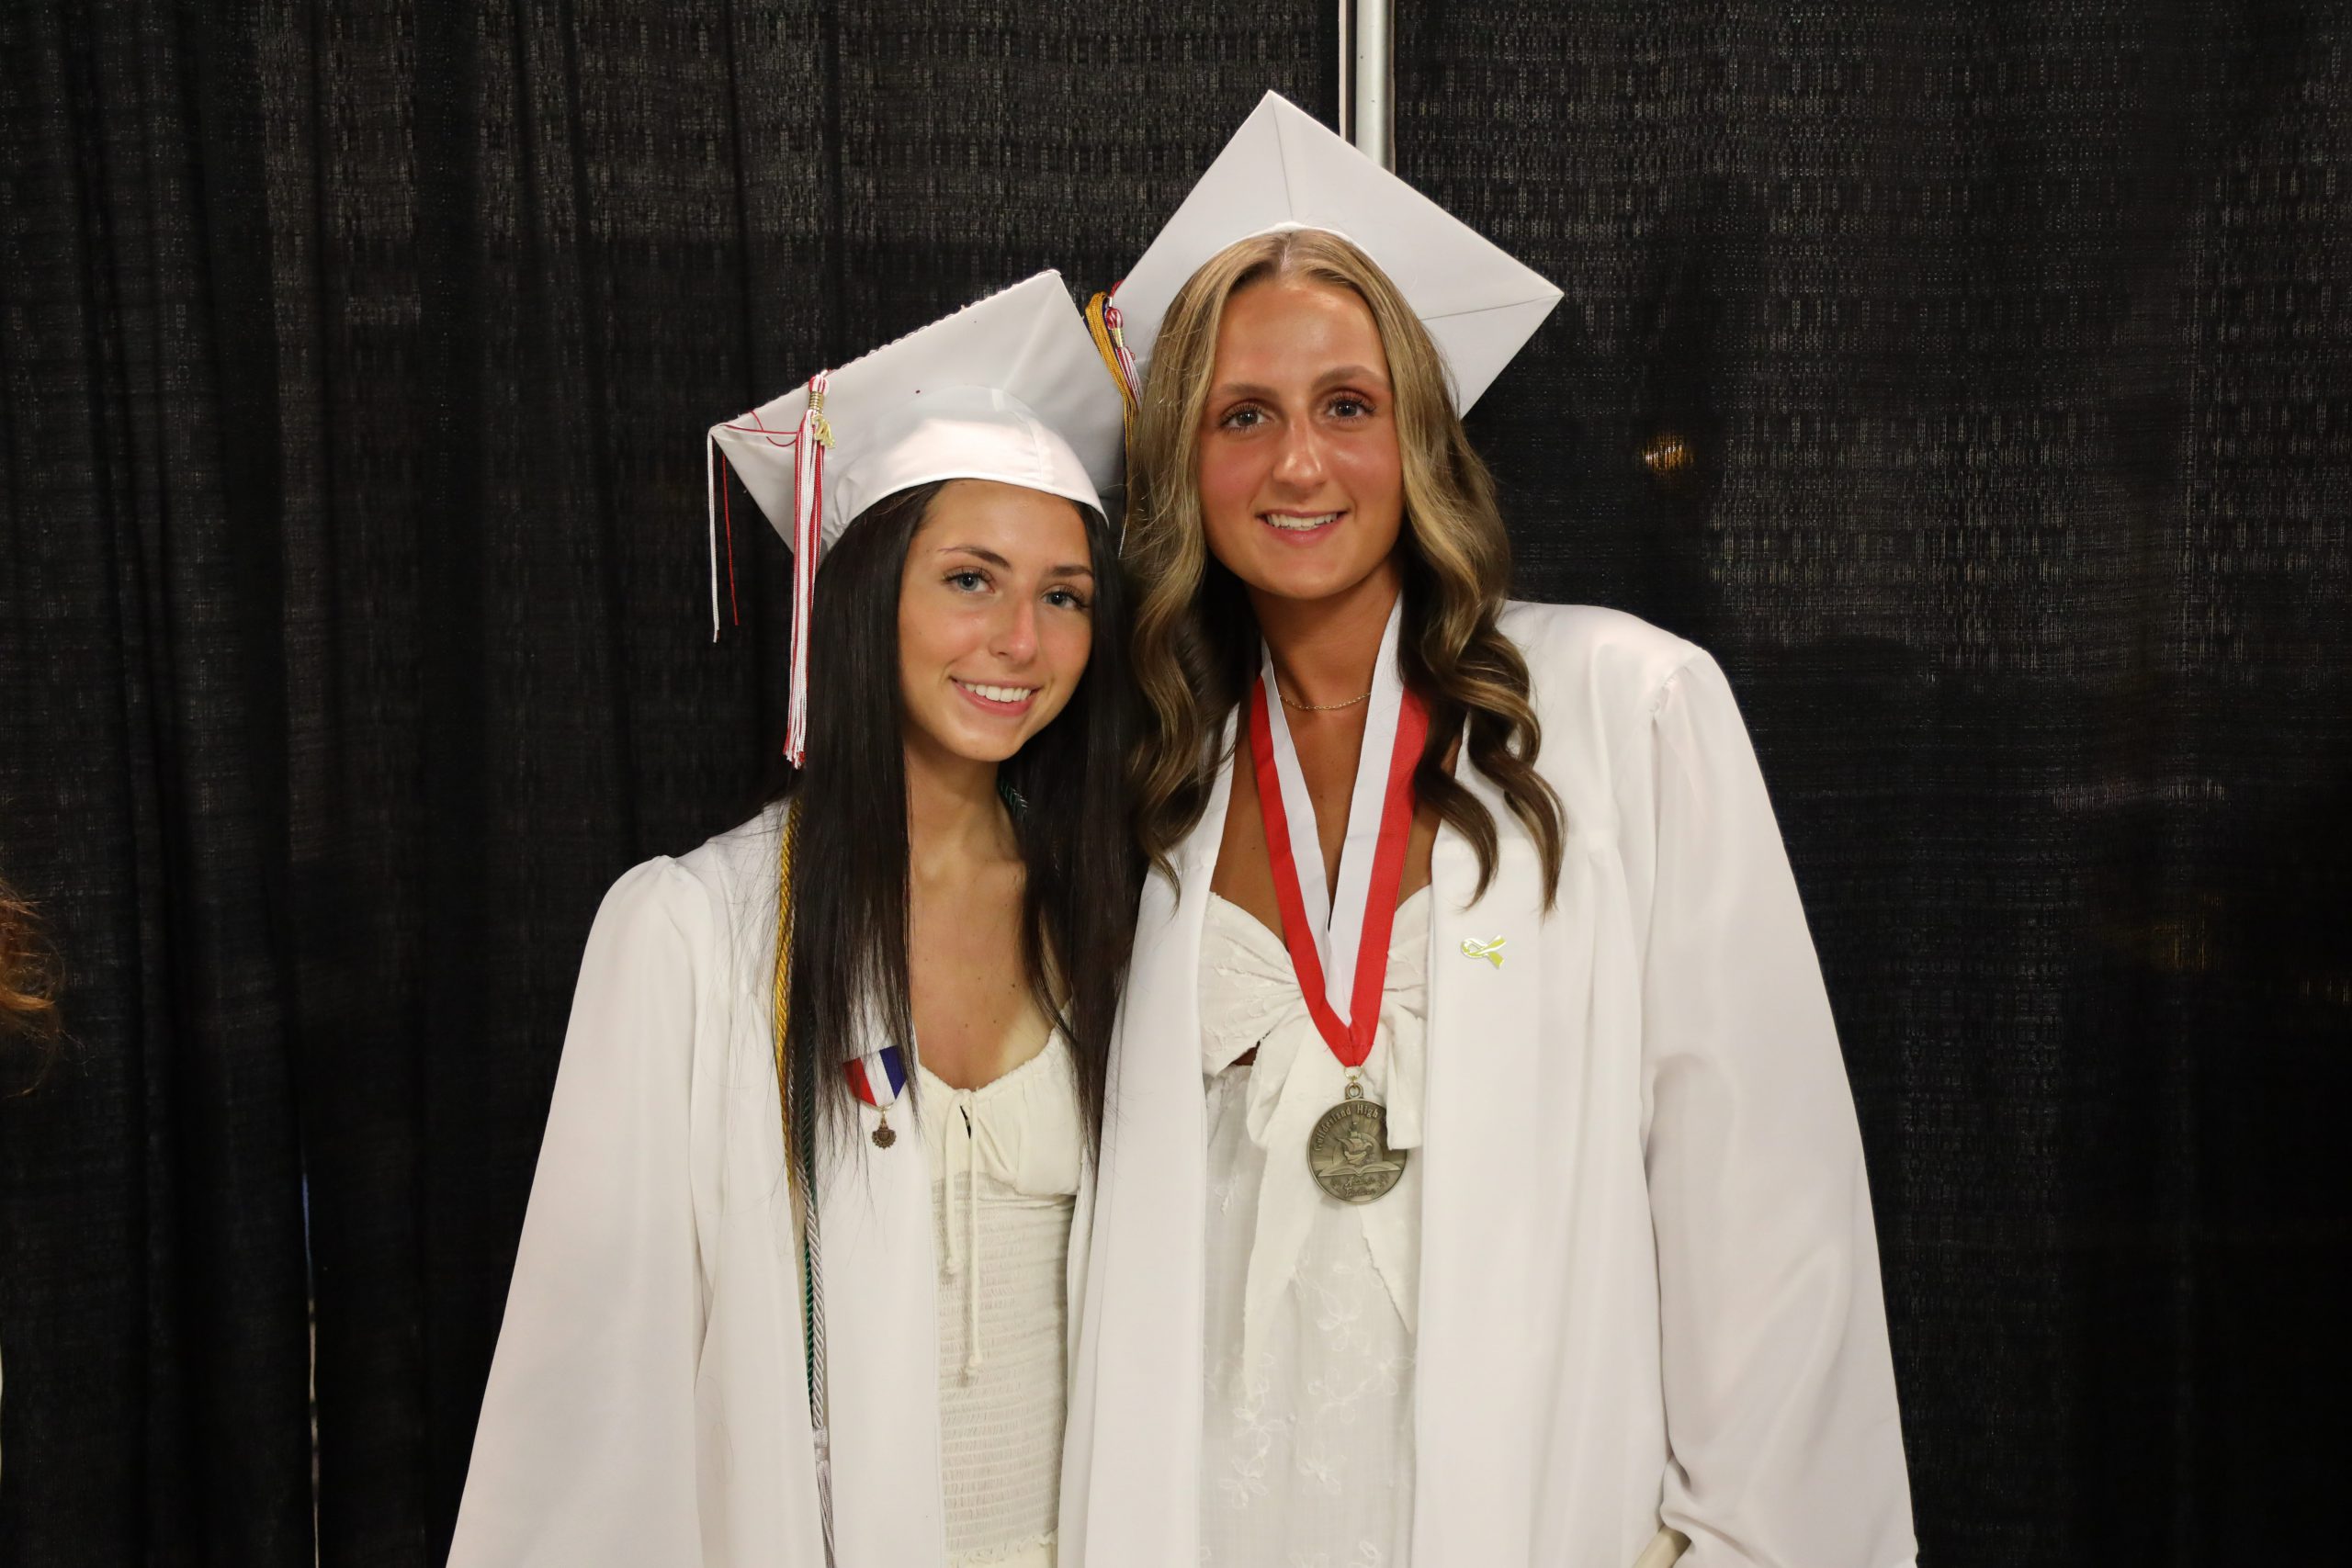 Two graduating students smiling together for a photo. Both girls are wearing white caps and gowns. The graduate on the right is also wearing a medal around her neck.